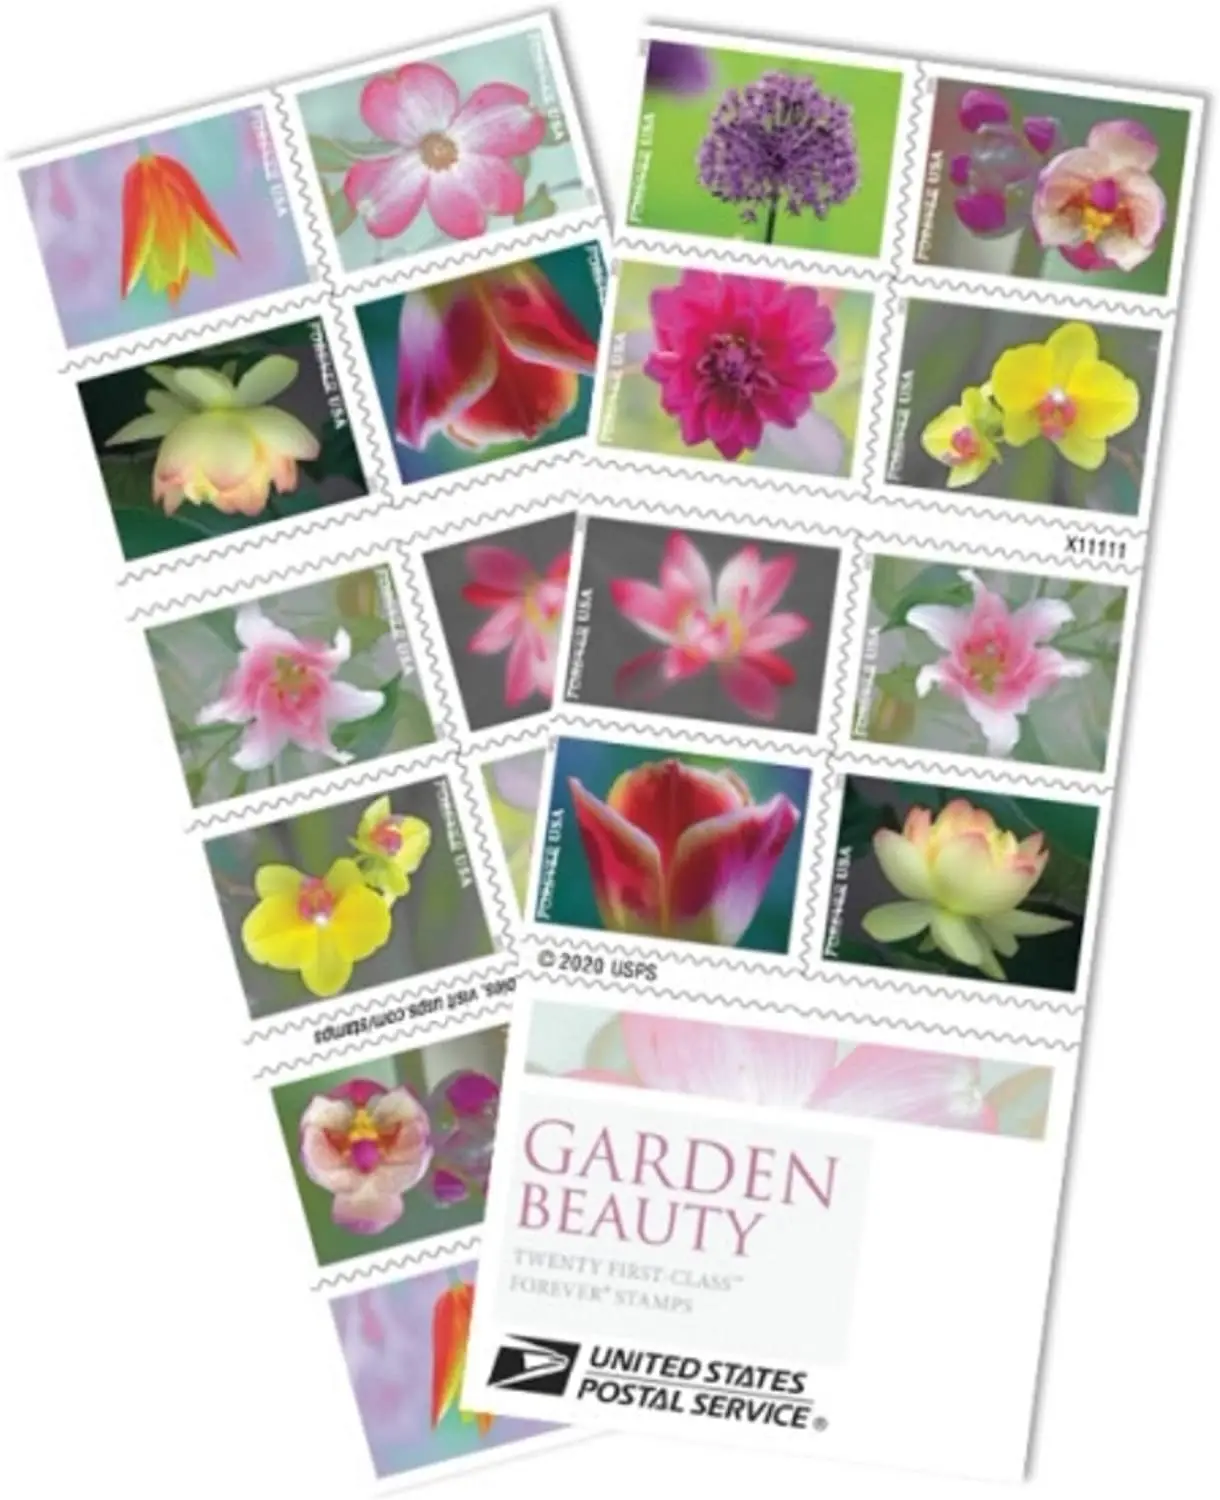 

Garden Beauty Forever Postage Stamps US Postal First Class Wedding Celebration Anniversary Flowers (4 Books of 80 Stamps)